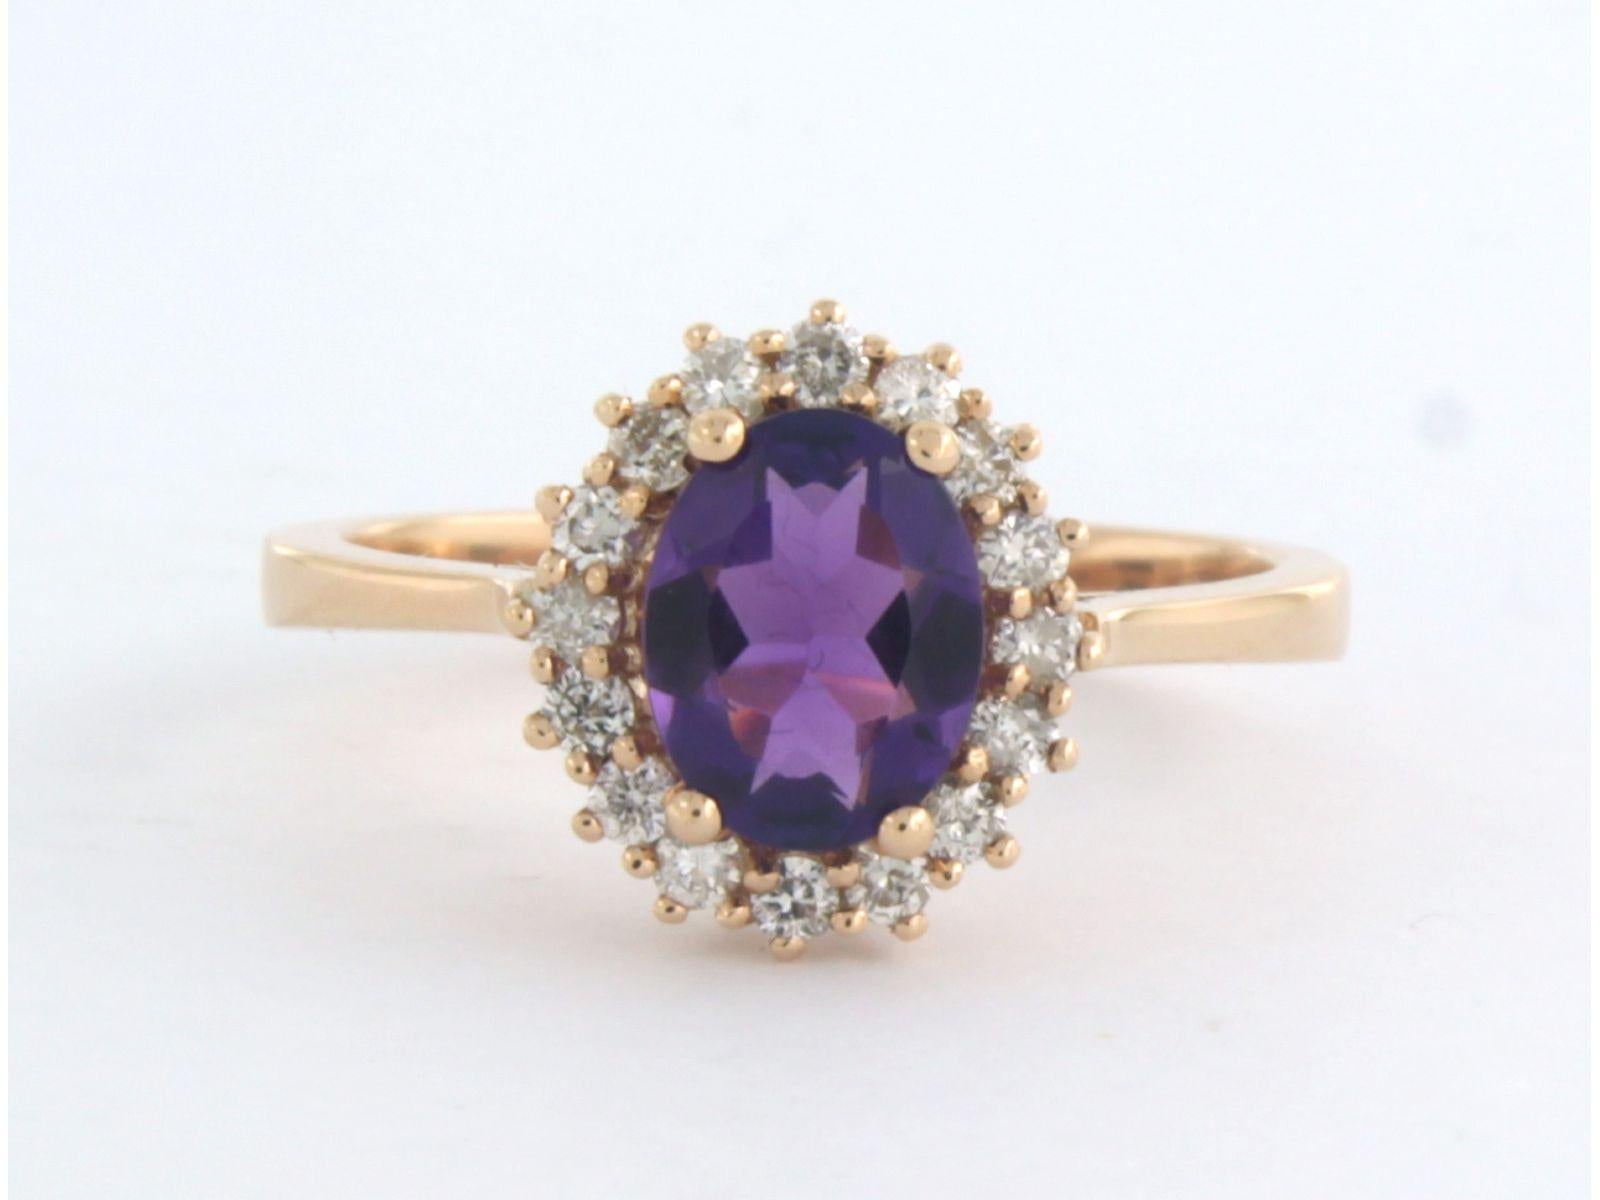 18k pink gold cluster ring set with central amethyst. 1.20ct and surrounded by brilliant cut diamonds up to. 0.32ct - F/G - VS/SI - ring size 7.25 US/ 17.5 (55) EU

Detailed description:

The top of the ring is 1.2 cm wide

weight: 4.1 grams

ring